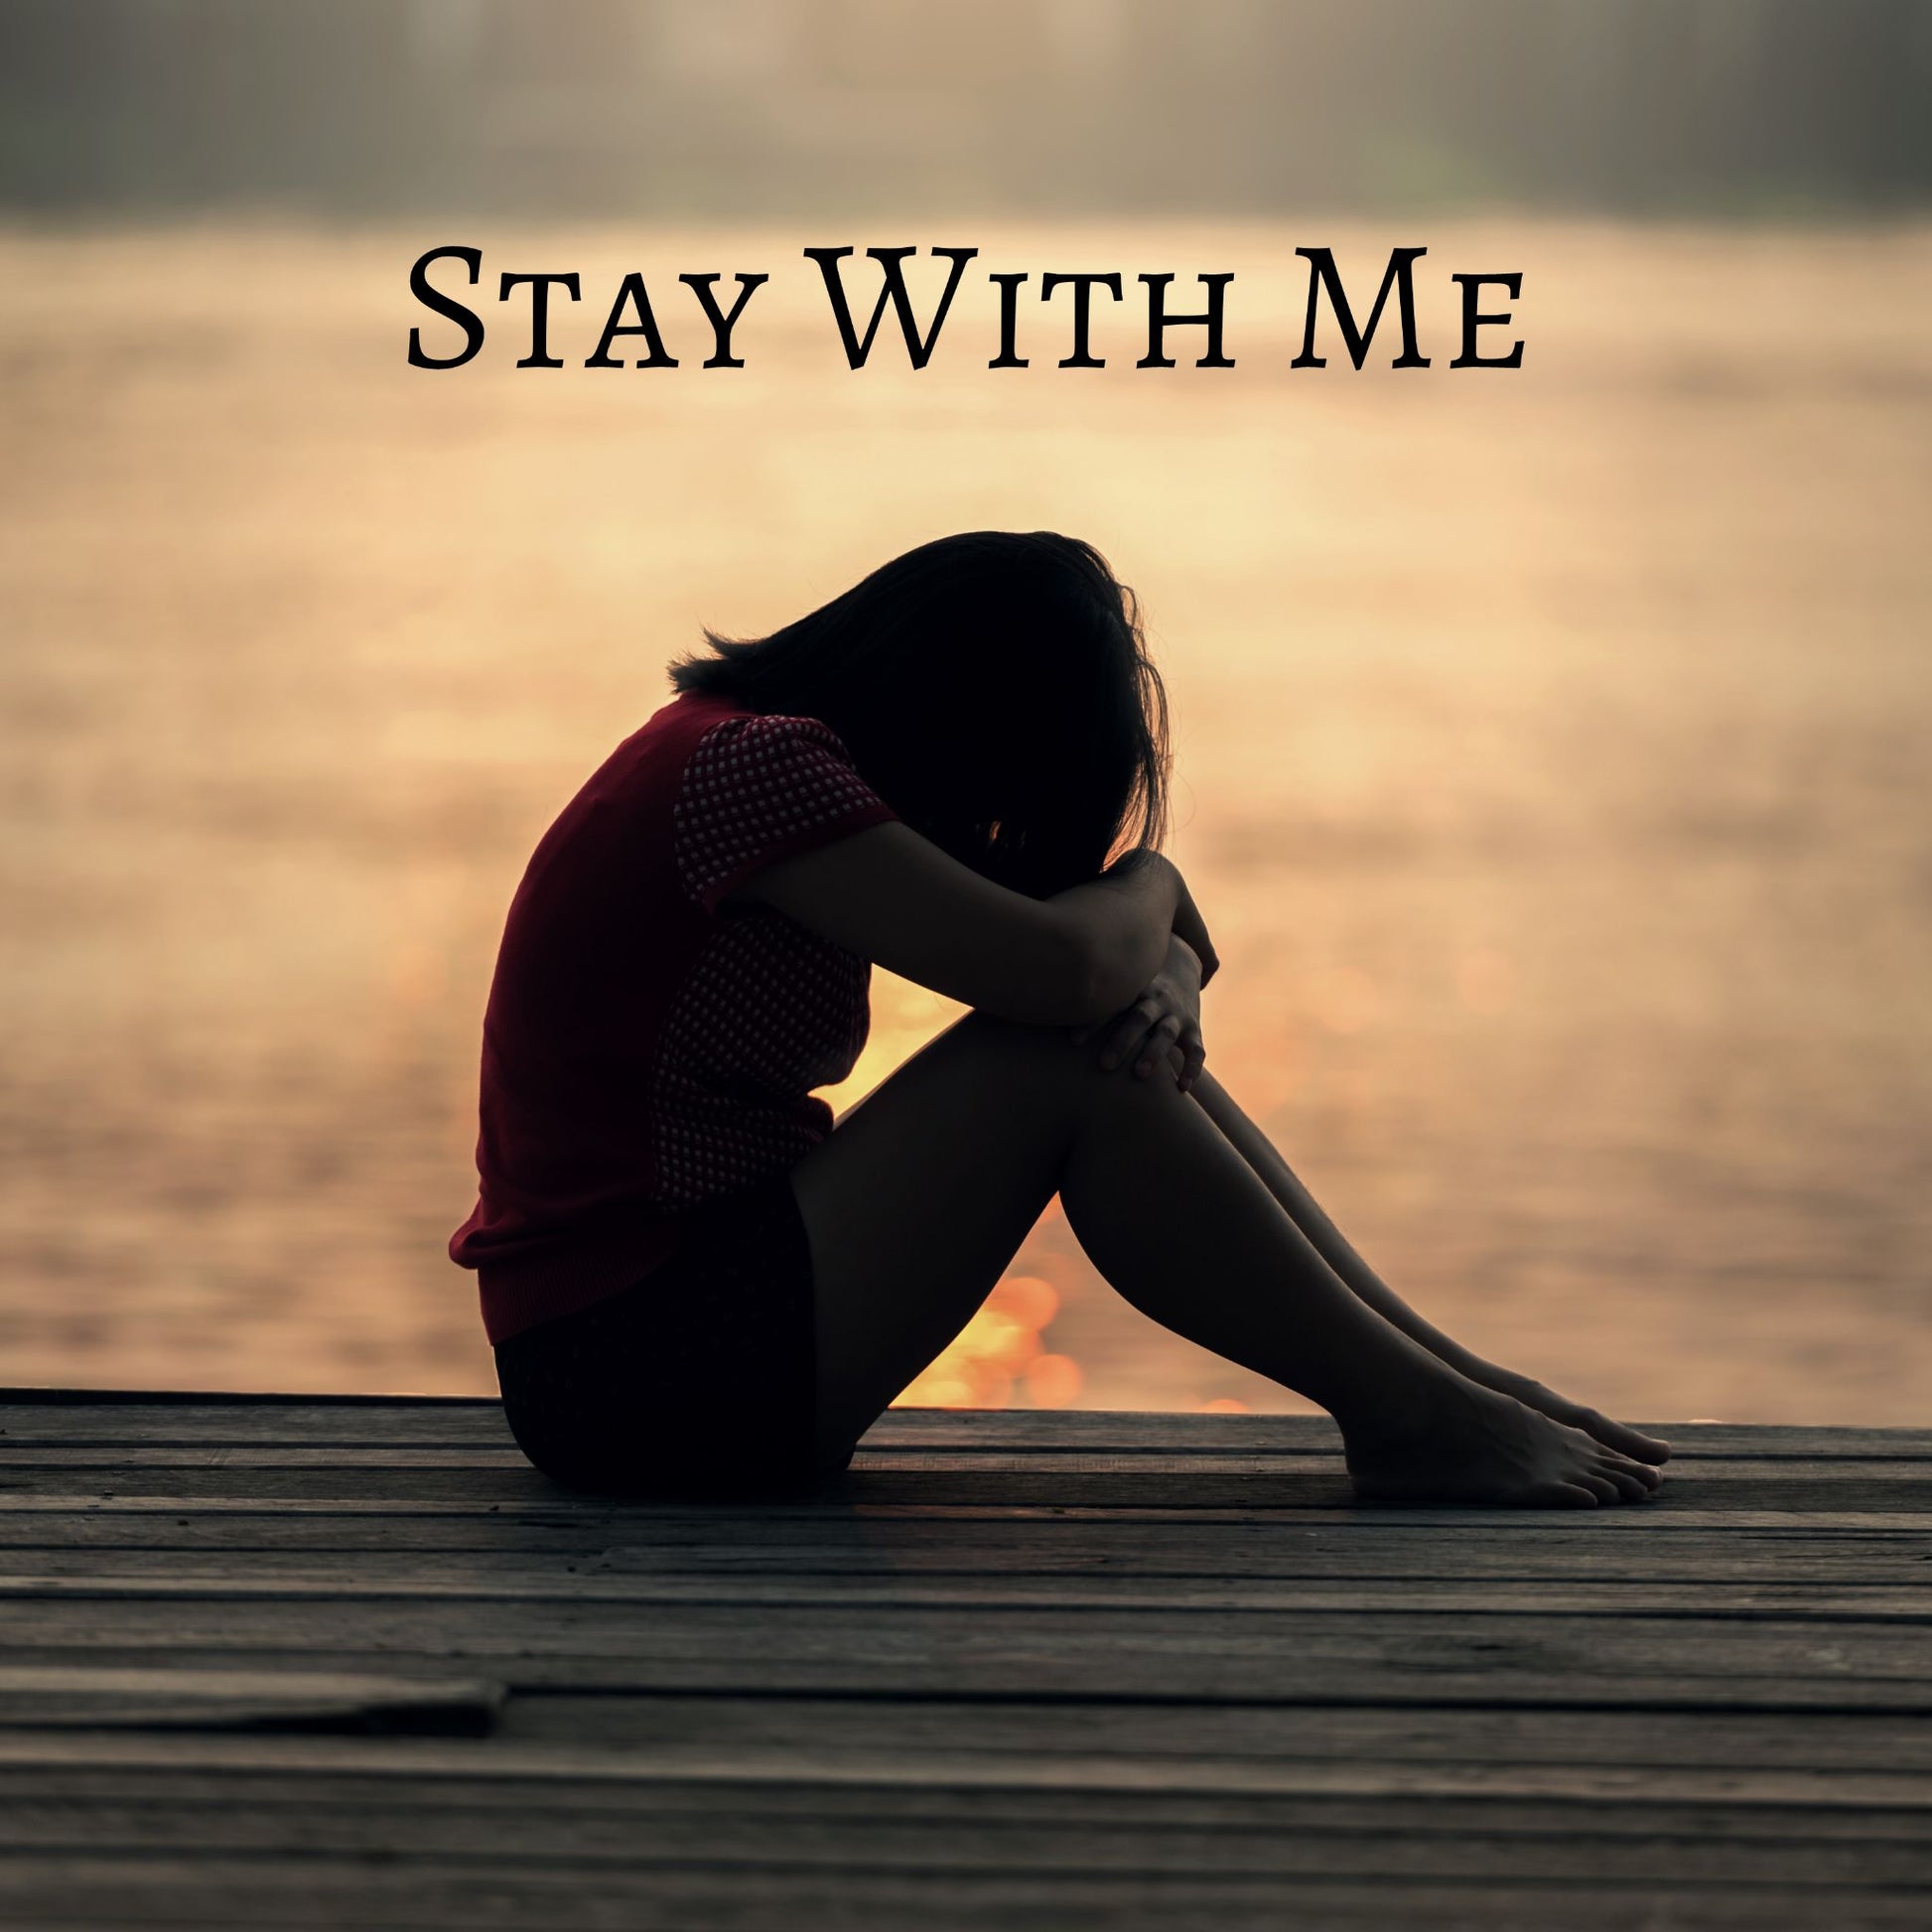 CD Cover of song Stay With Me